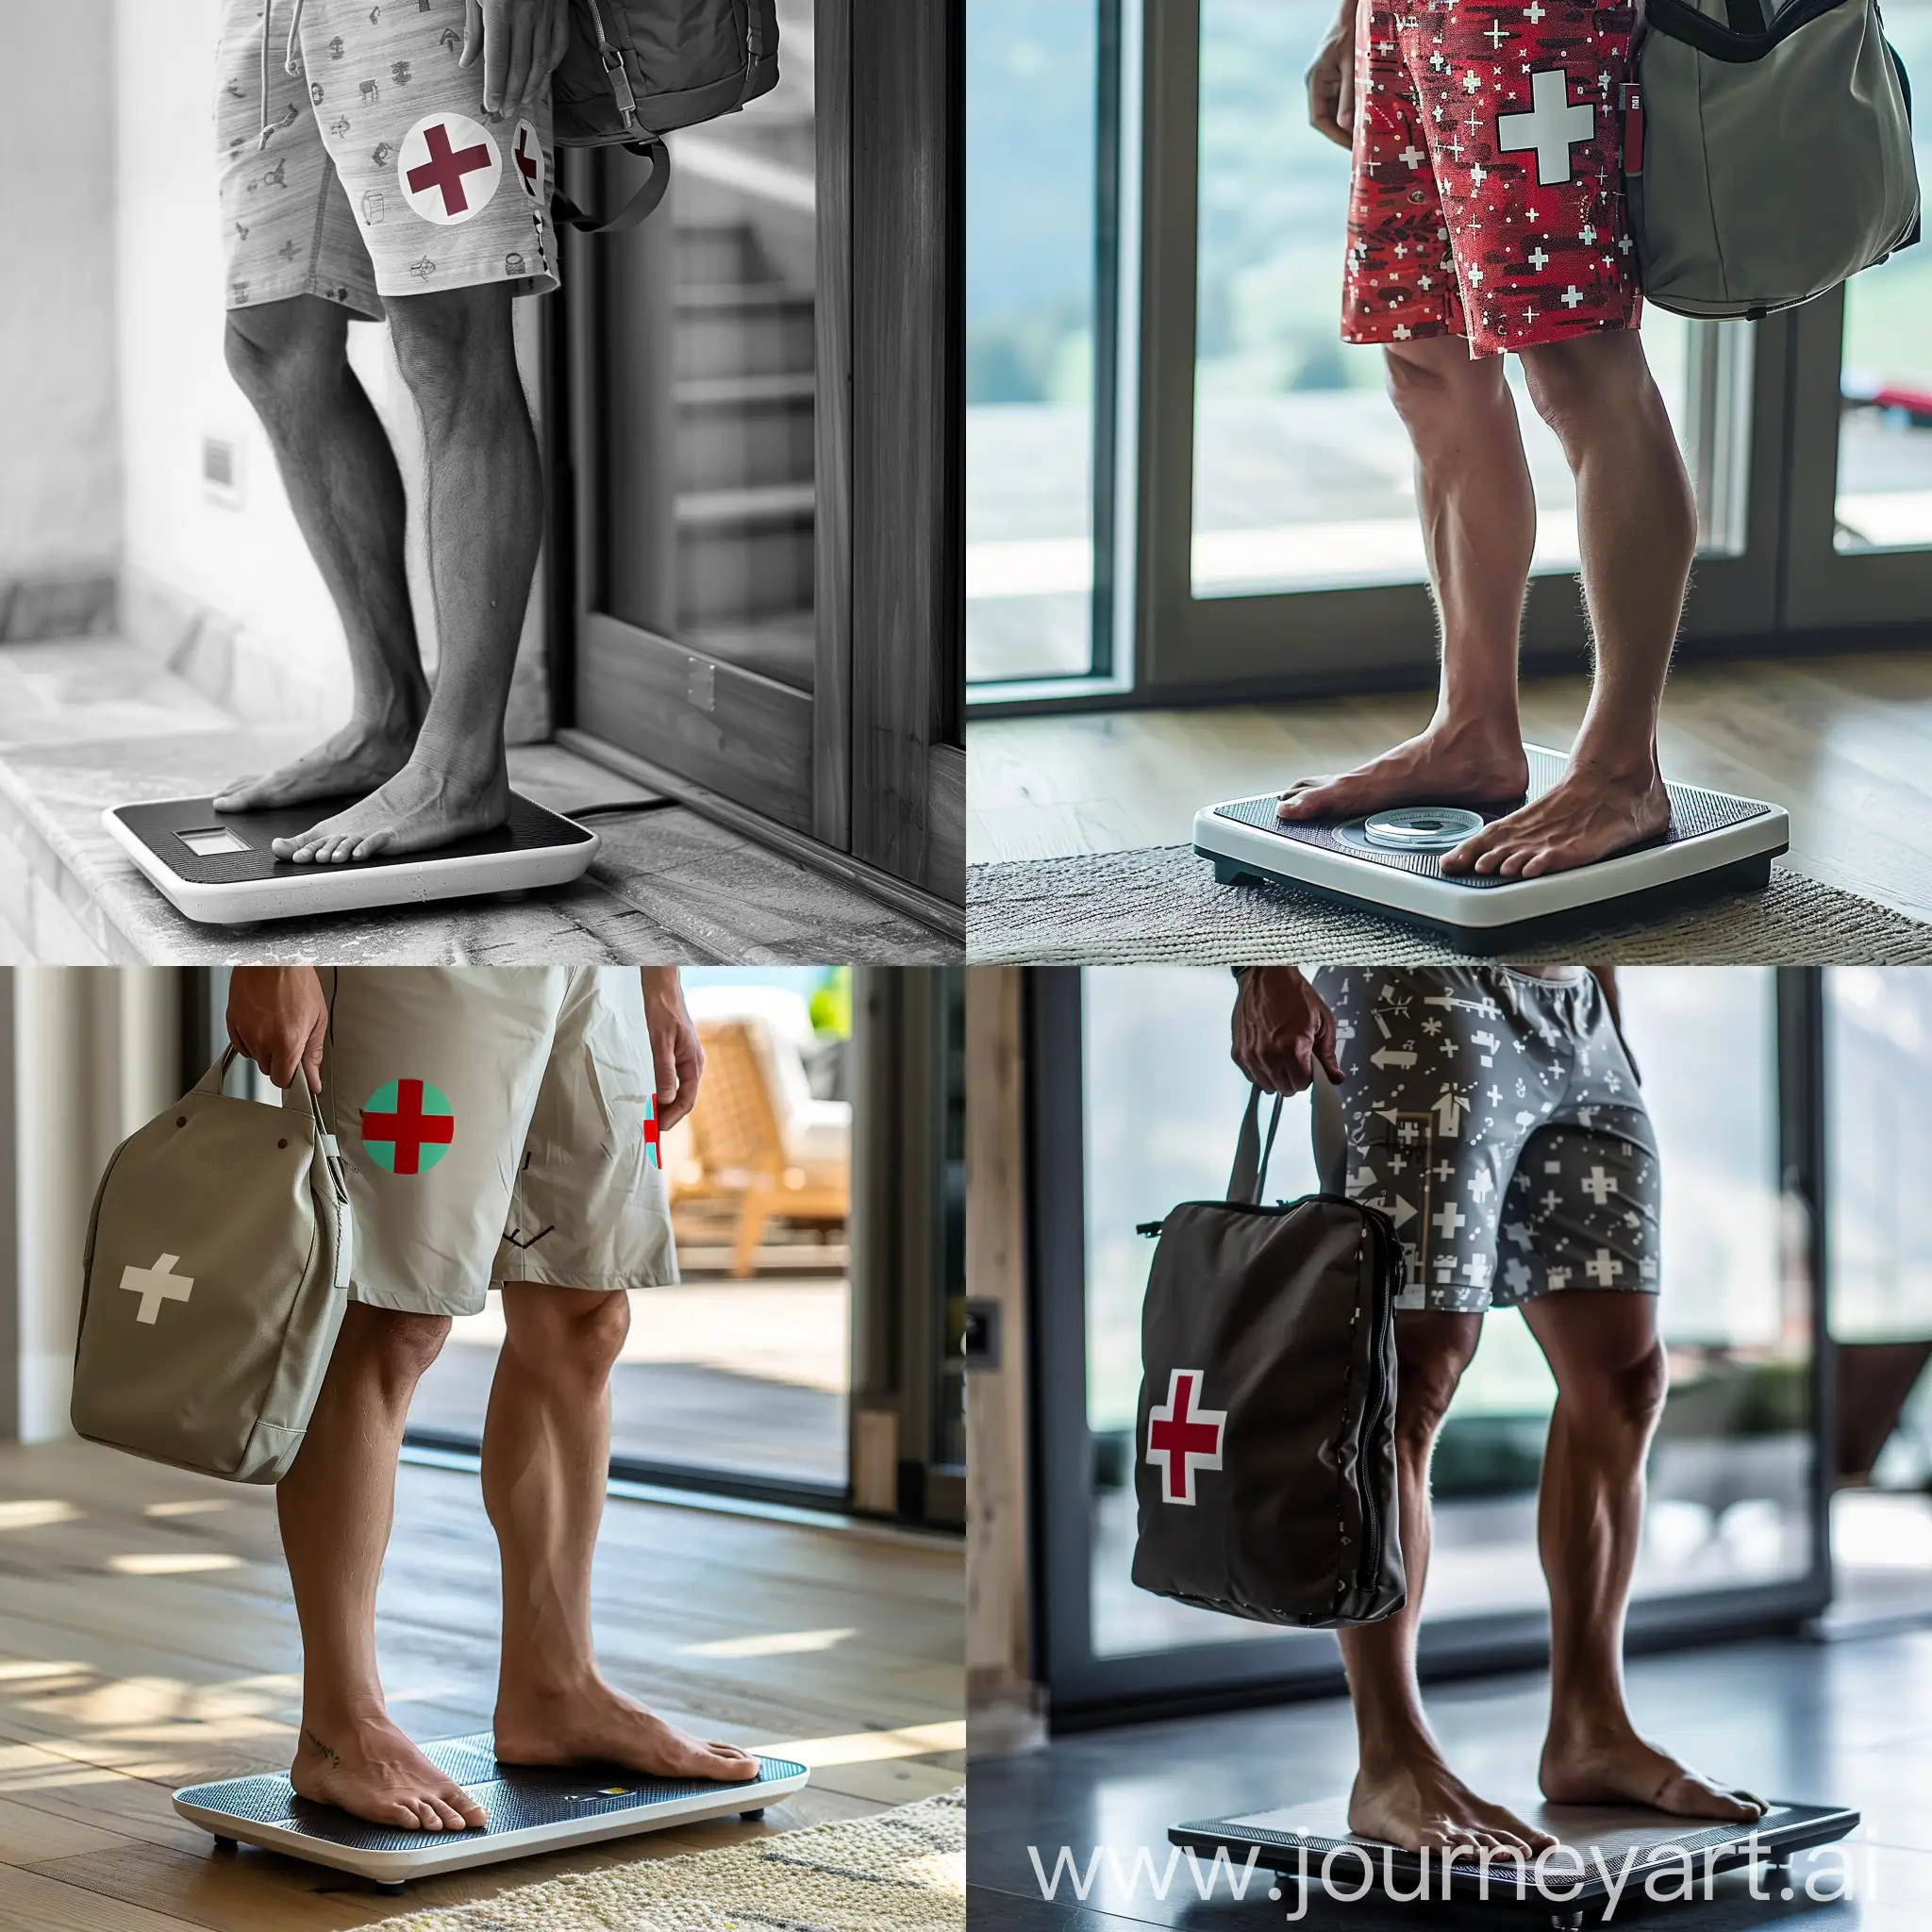 TravelReady-Fitness-Enthusiast-Weighing-In-Swiss-Shorts-and-Bag-in-Hand